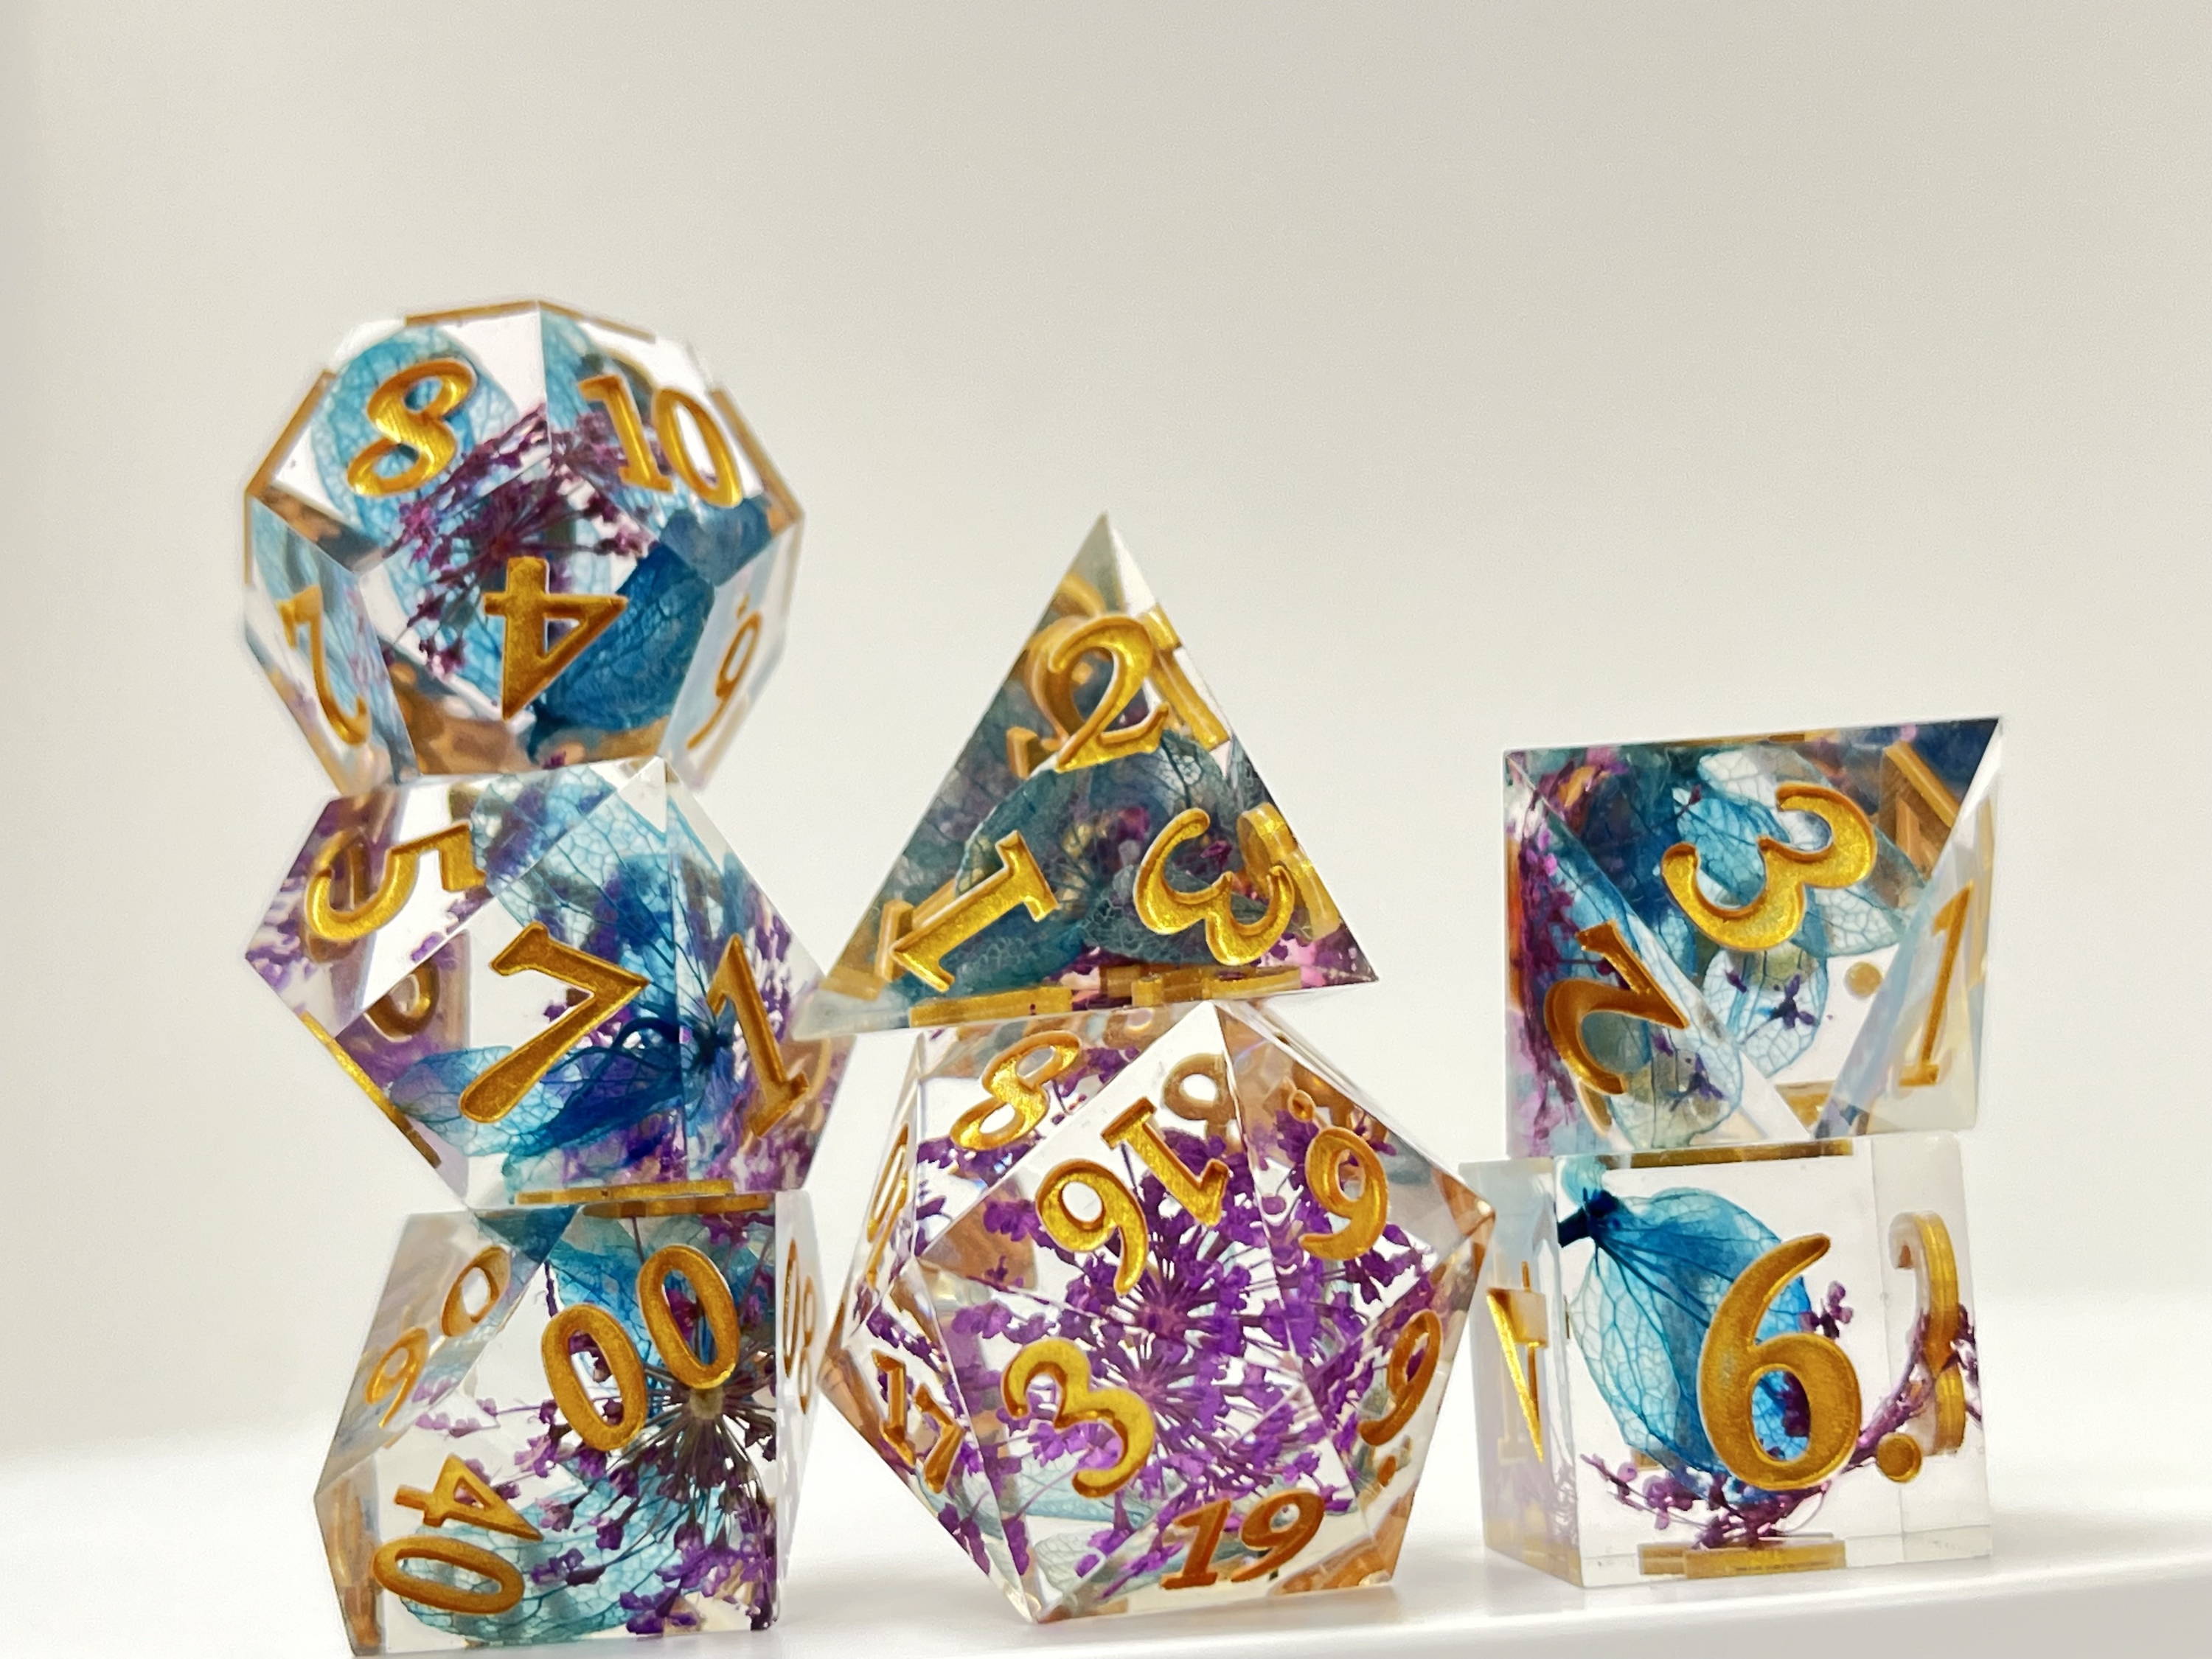 Sharp edge dice sets for DND, dungeons and dragons, TTRPG role playing games and dice goblin collectors